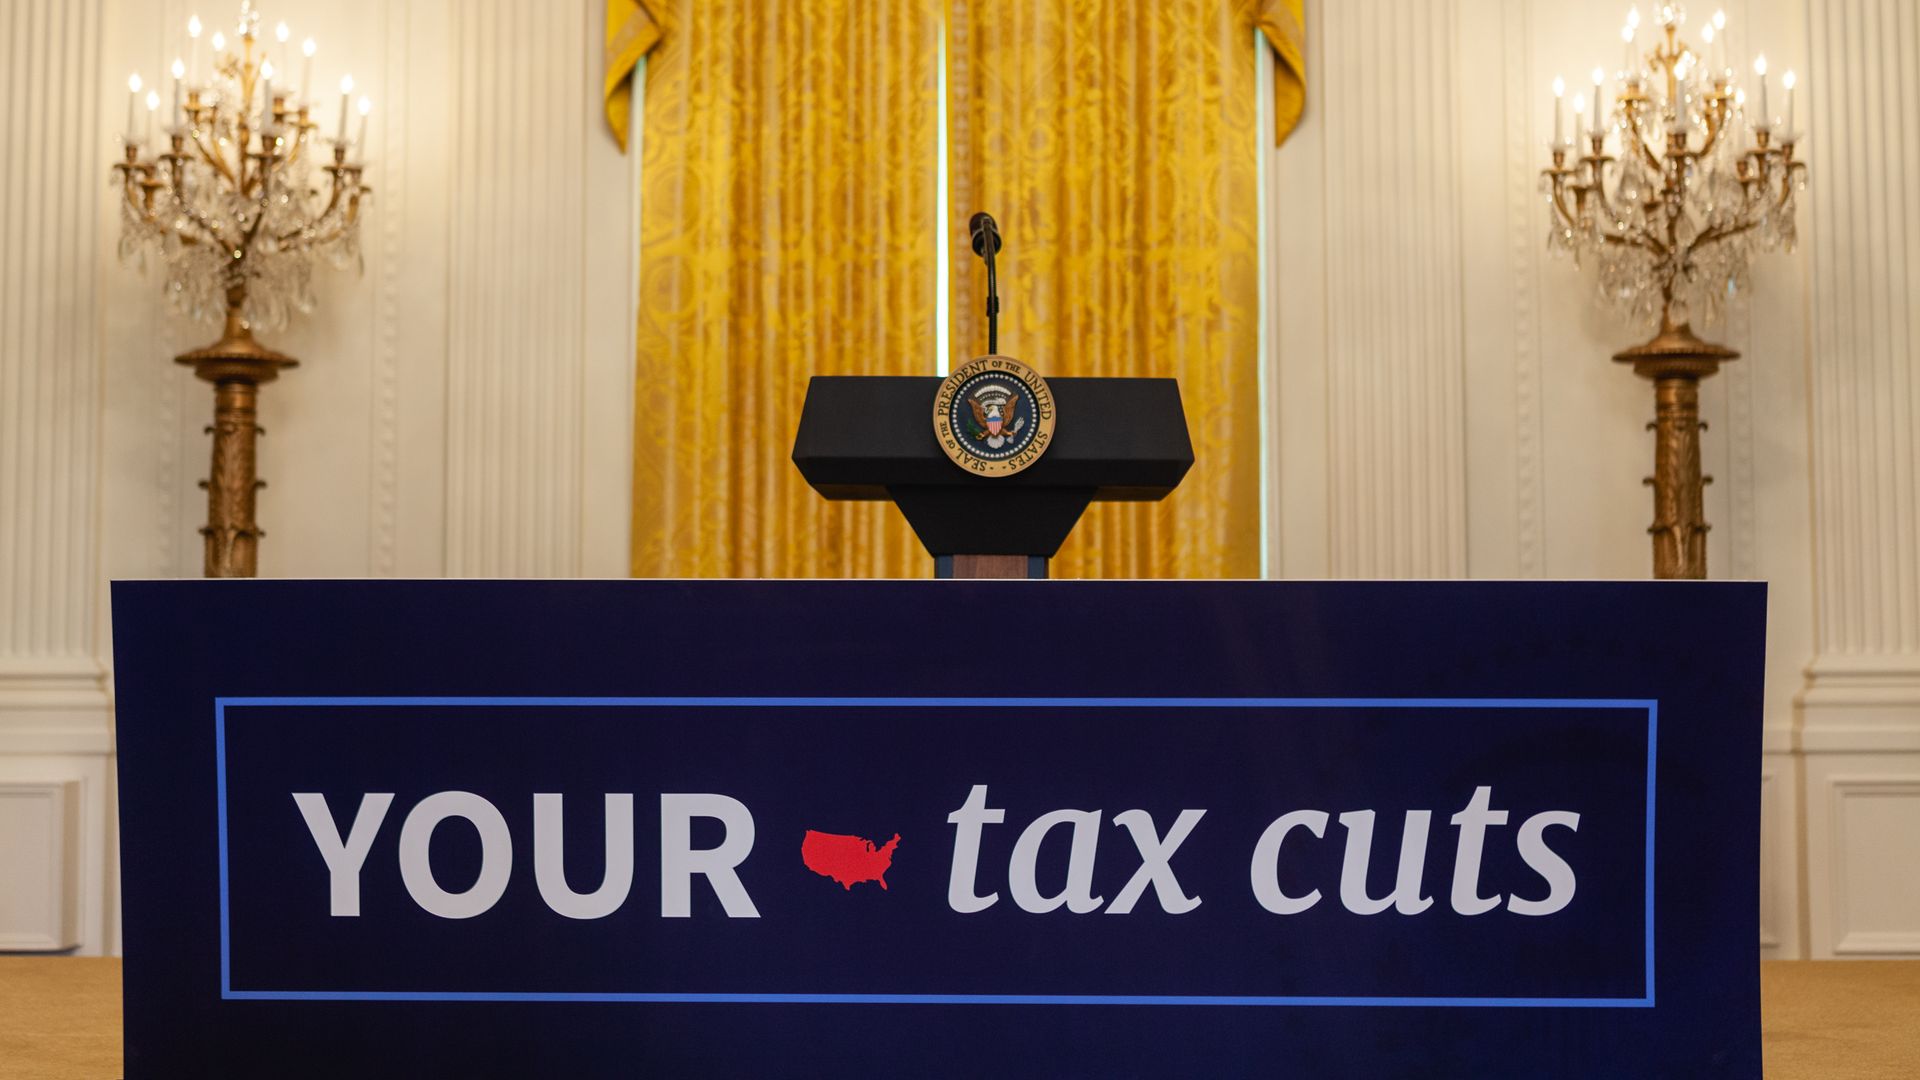 Lecturn behind a sign that says "YOUR tax cuts"